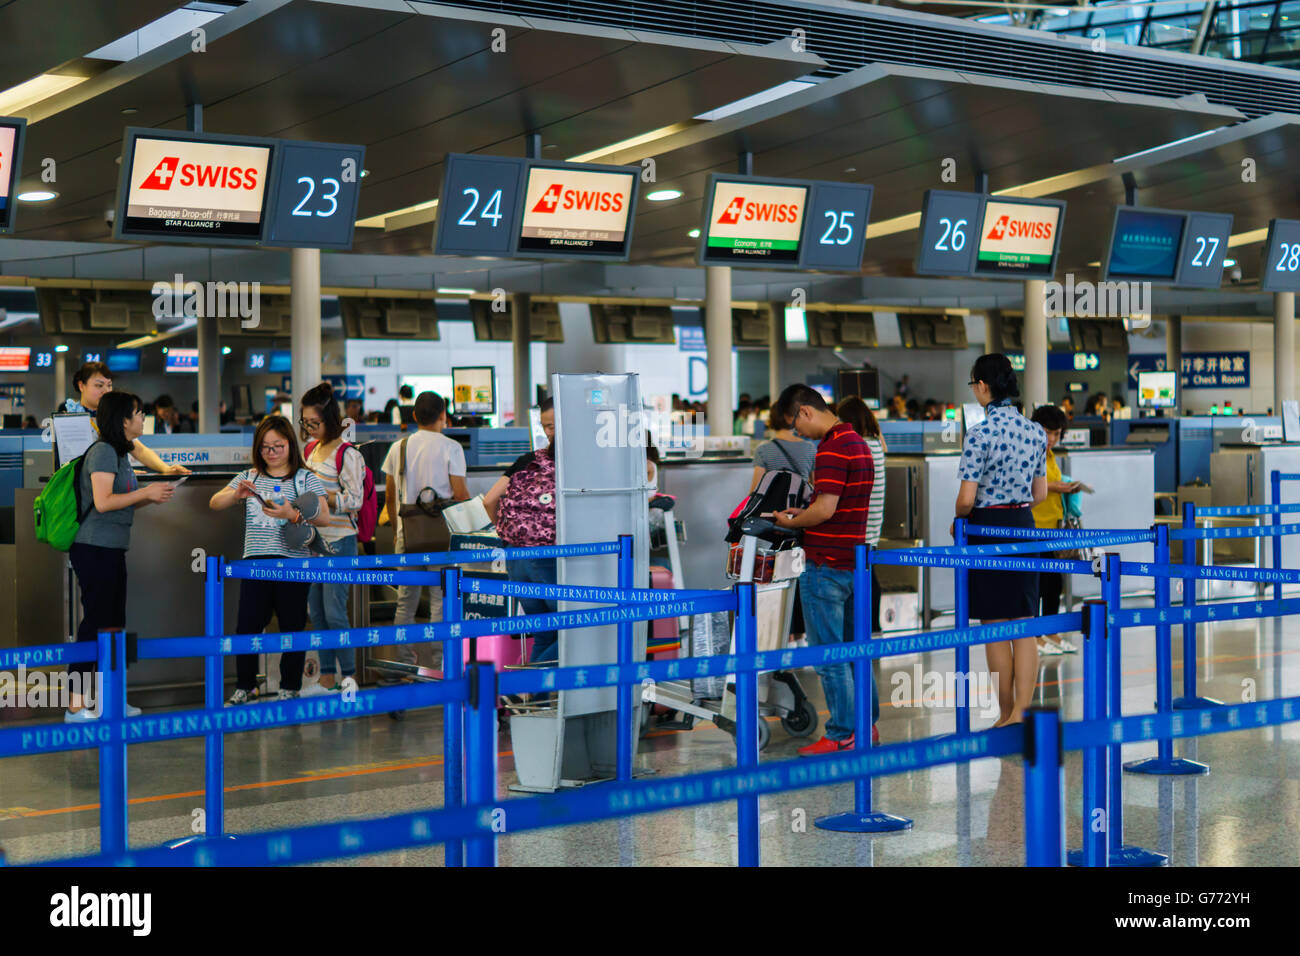 Airport check-in counter control, Swiss Air, Shanghai Pudong Airport, China Stock Photo